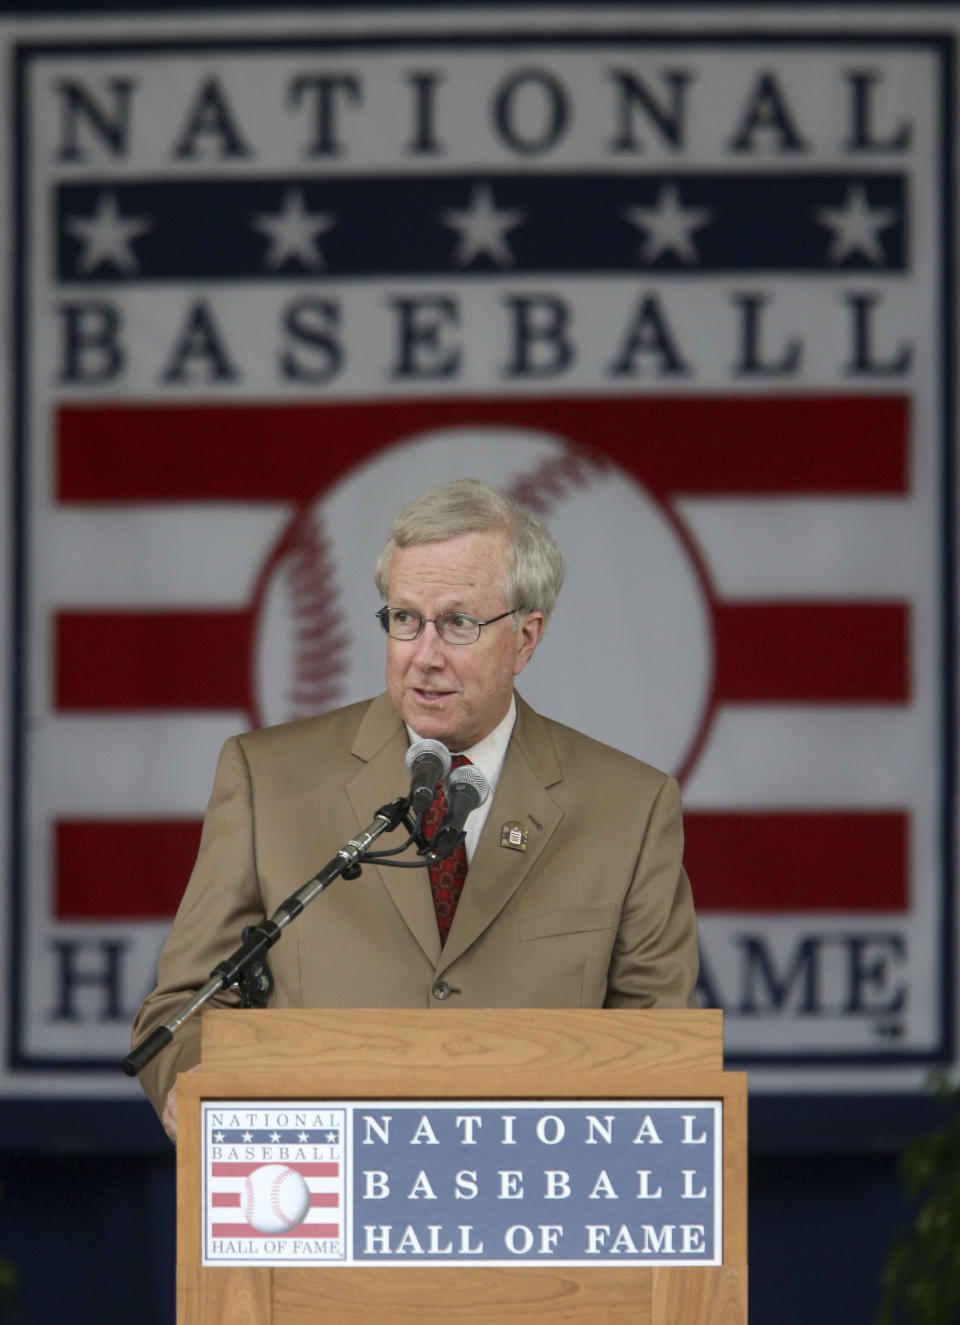 St. Louis Post-Dispatch baseball writer Rick Hummel gives his acceptance speech after receiving the J. G. Taylor Spink award during the Baseball Hall of Fame Induction Ceremony at the Clark Sports Center in Cooperstown, NY., on July 29, 2007. Hummel, an esteemed writer who covered the St. Louis Cardinals and Major League Baseball for five decades for the Post-Dispatch until his retirement in 2022, died Saturday, May 20, 2023, after a short, unspecified illness the Post-Dispatch said Monday. He was 77. (Chris Lee/St. Louis Post-Dispatch via AP)